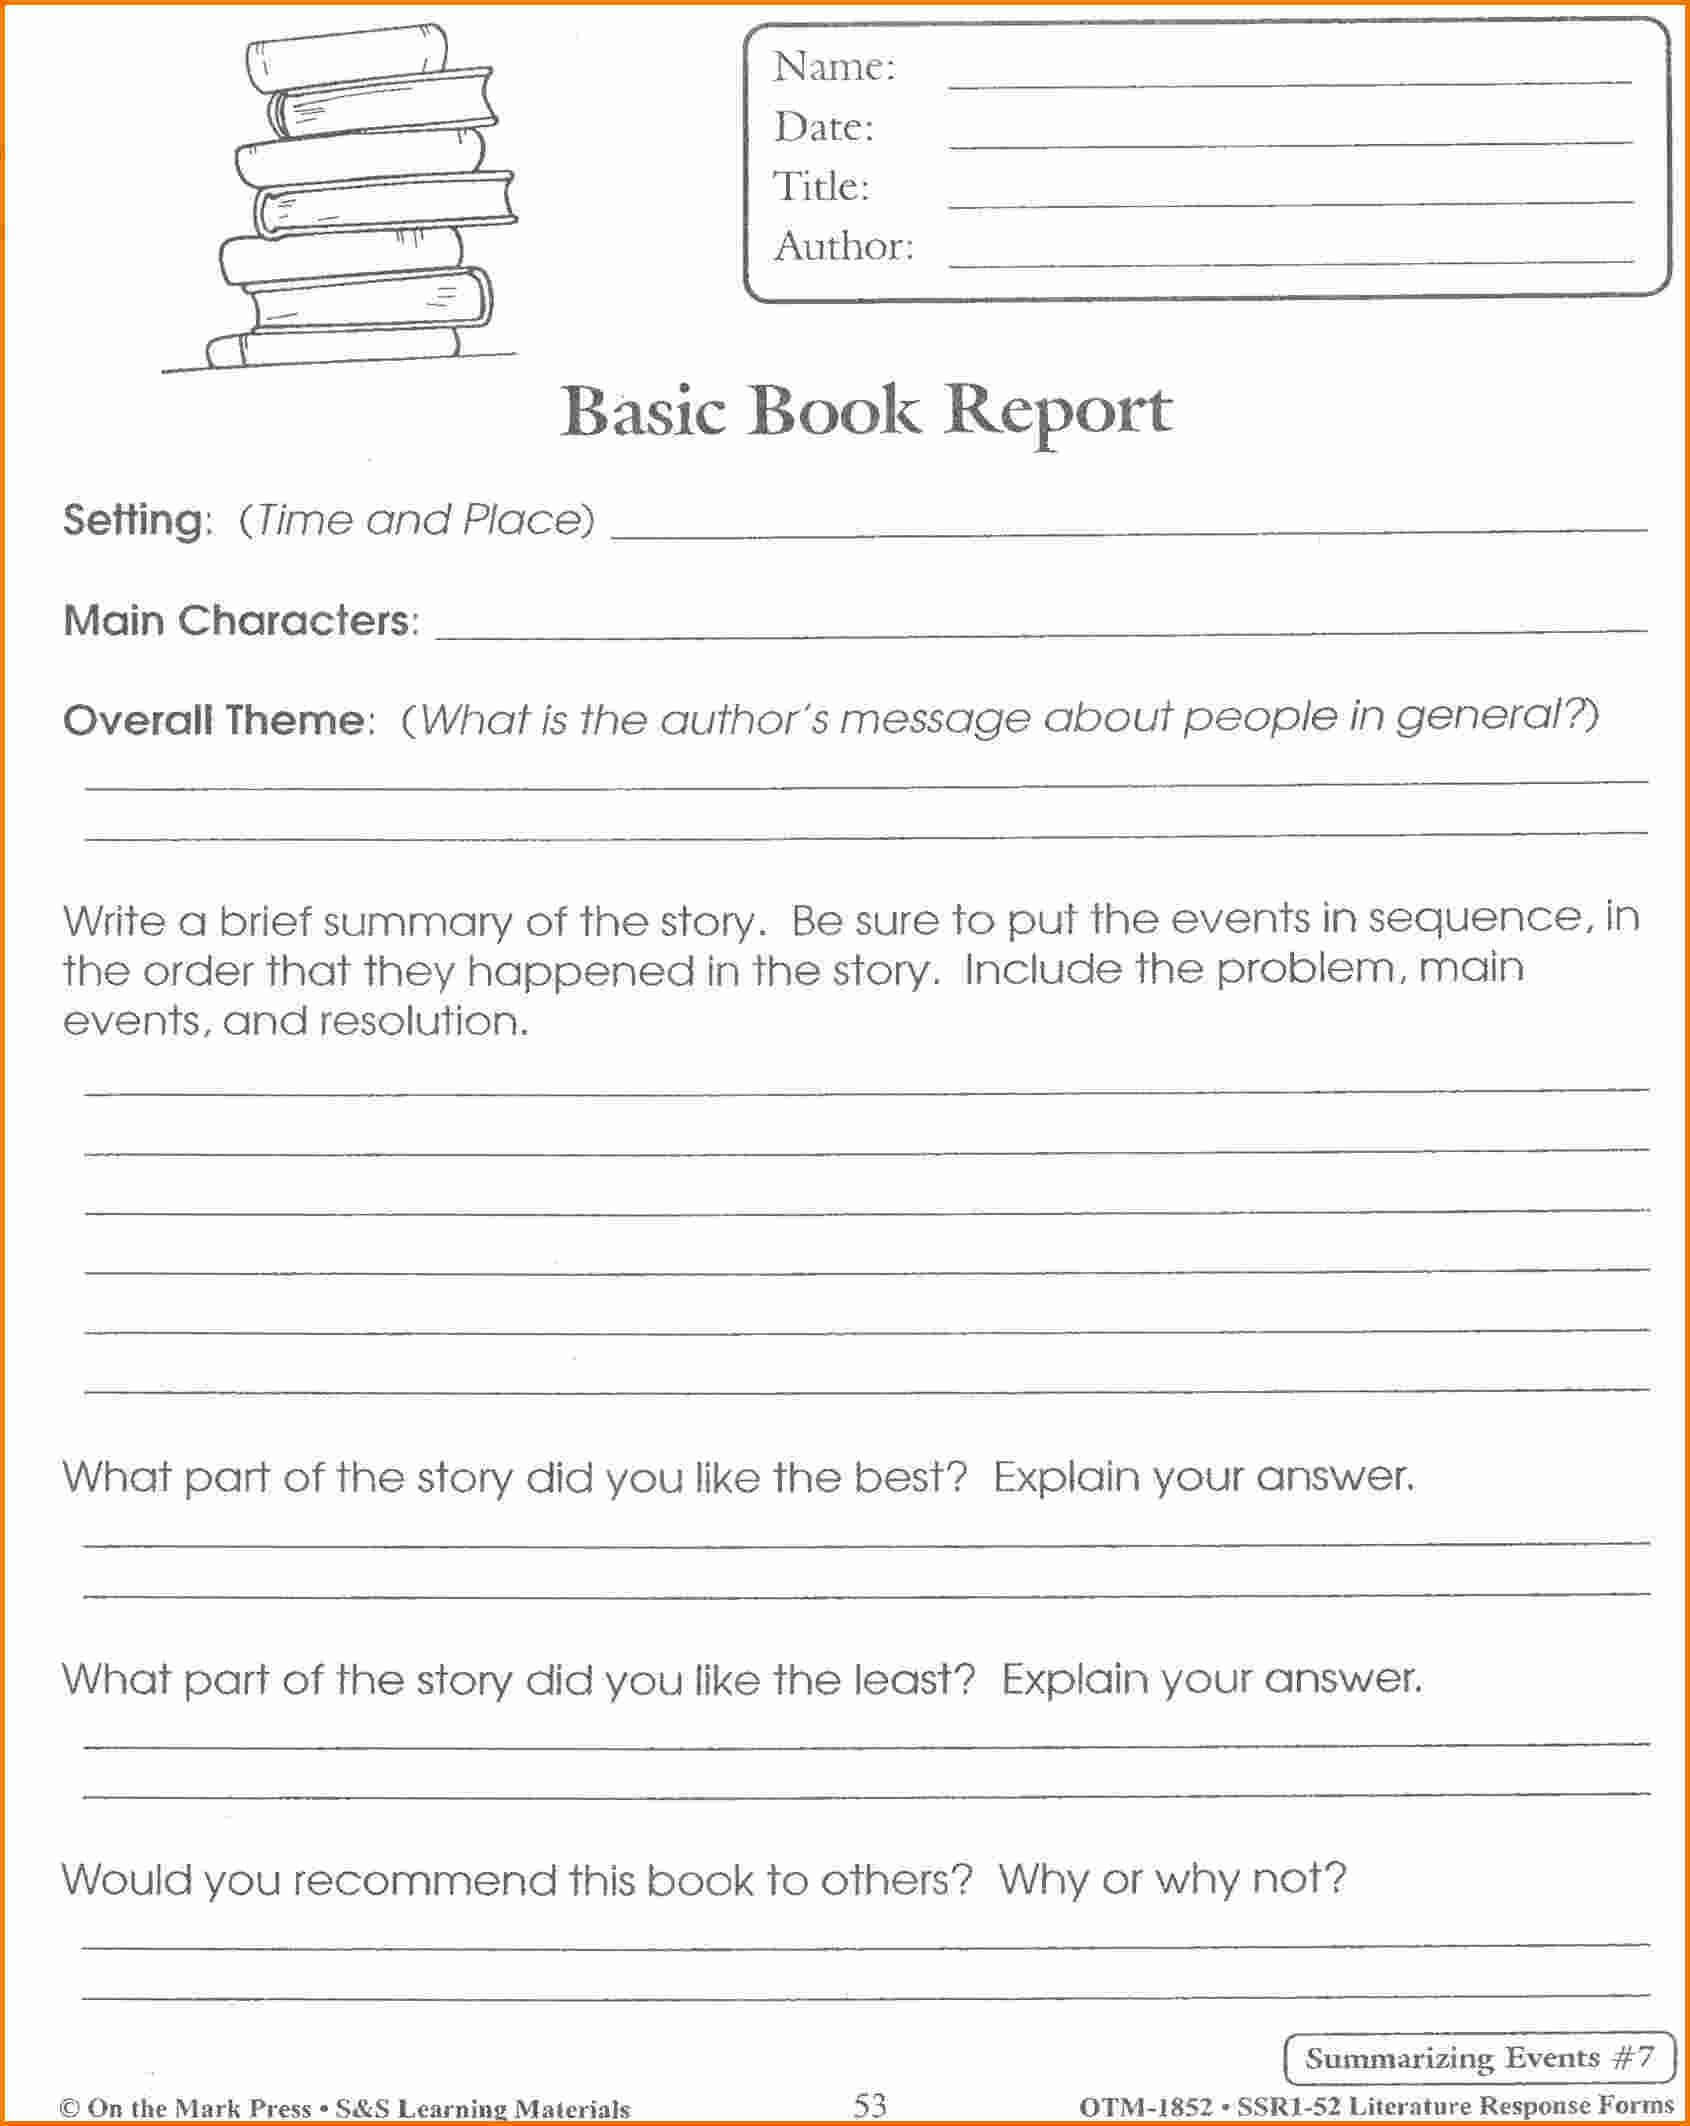 Pinmarcus Tong On Book | Book Report Templates, Book Pertaining To 4Th Grade Book Report Template